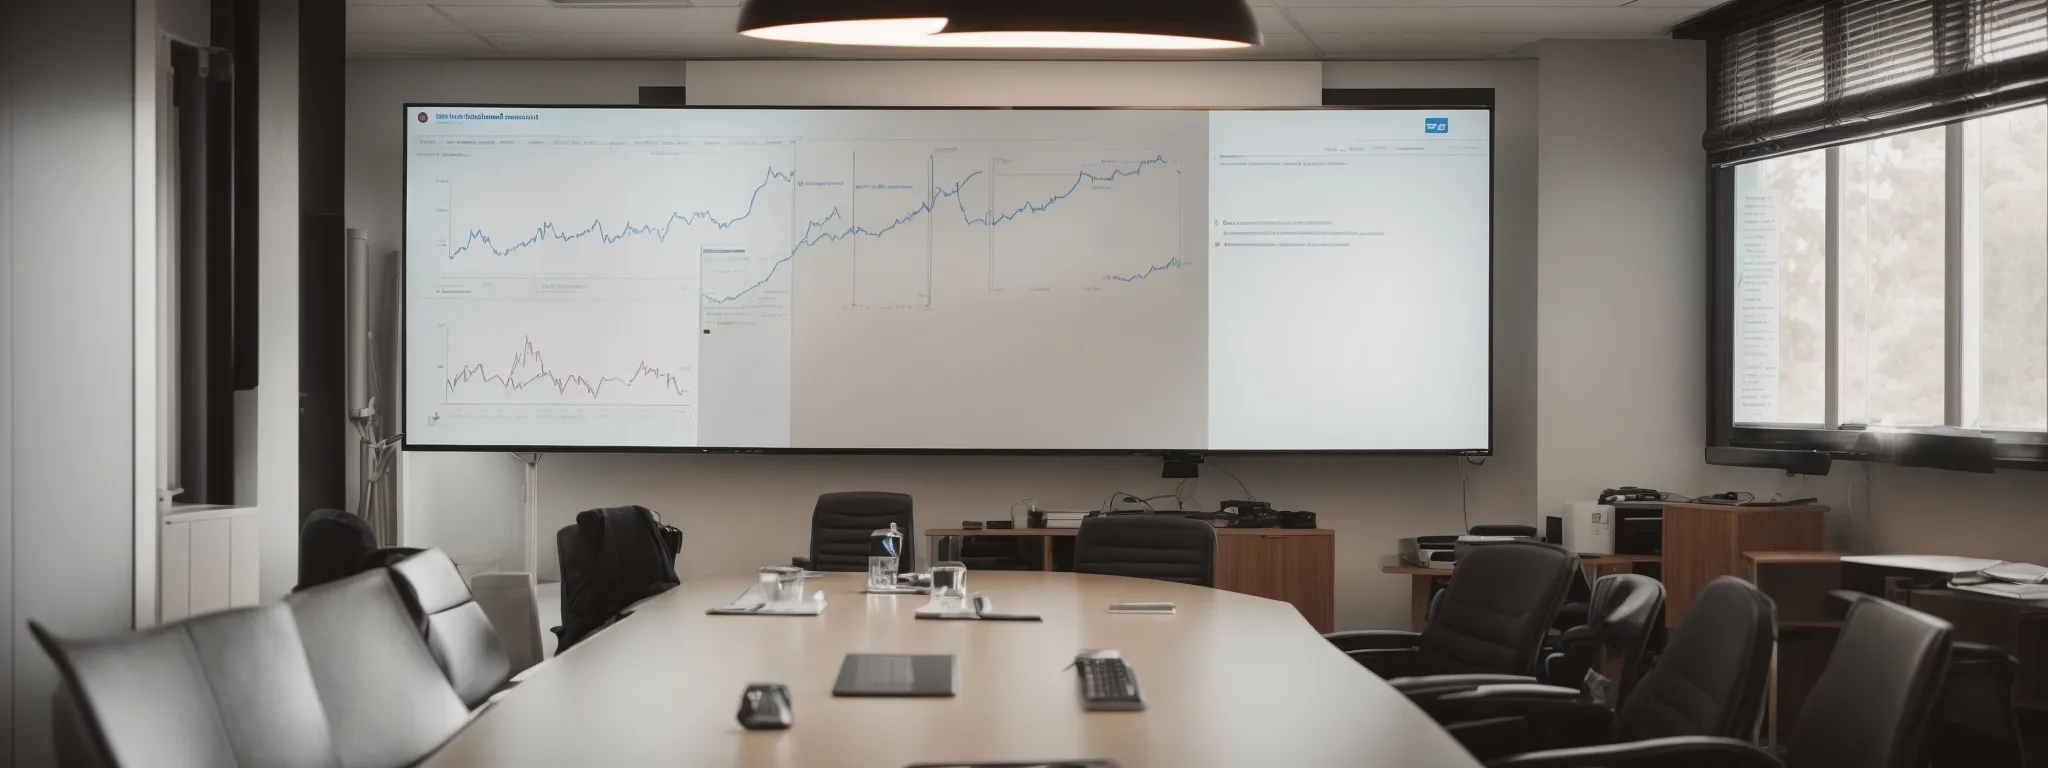 a strategic meeting room with a whiteboard illustrating a step-by-step plan and a computer displaying a graph of increasing website traffic.